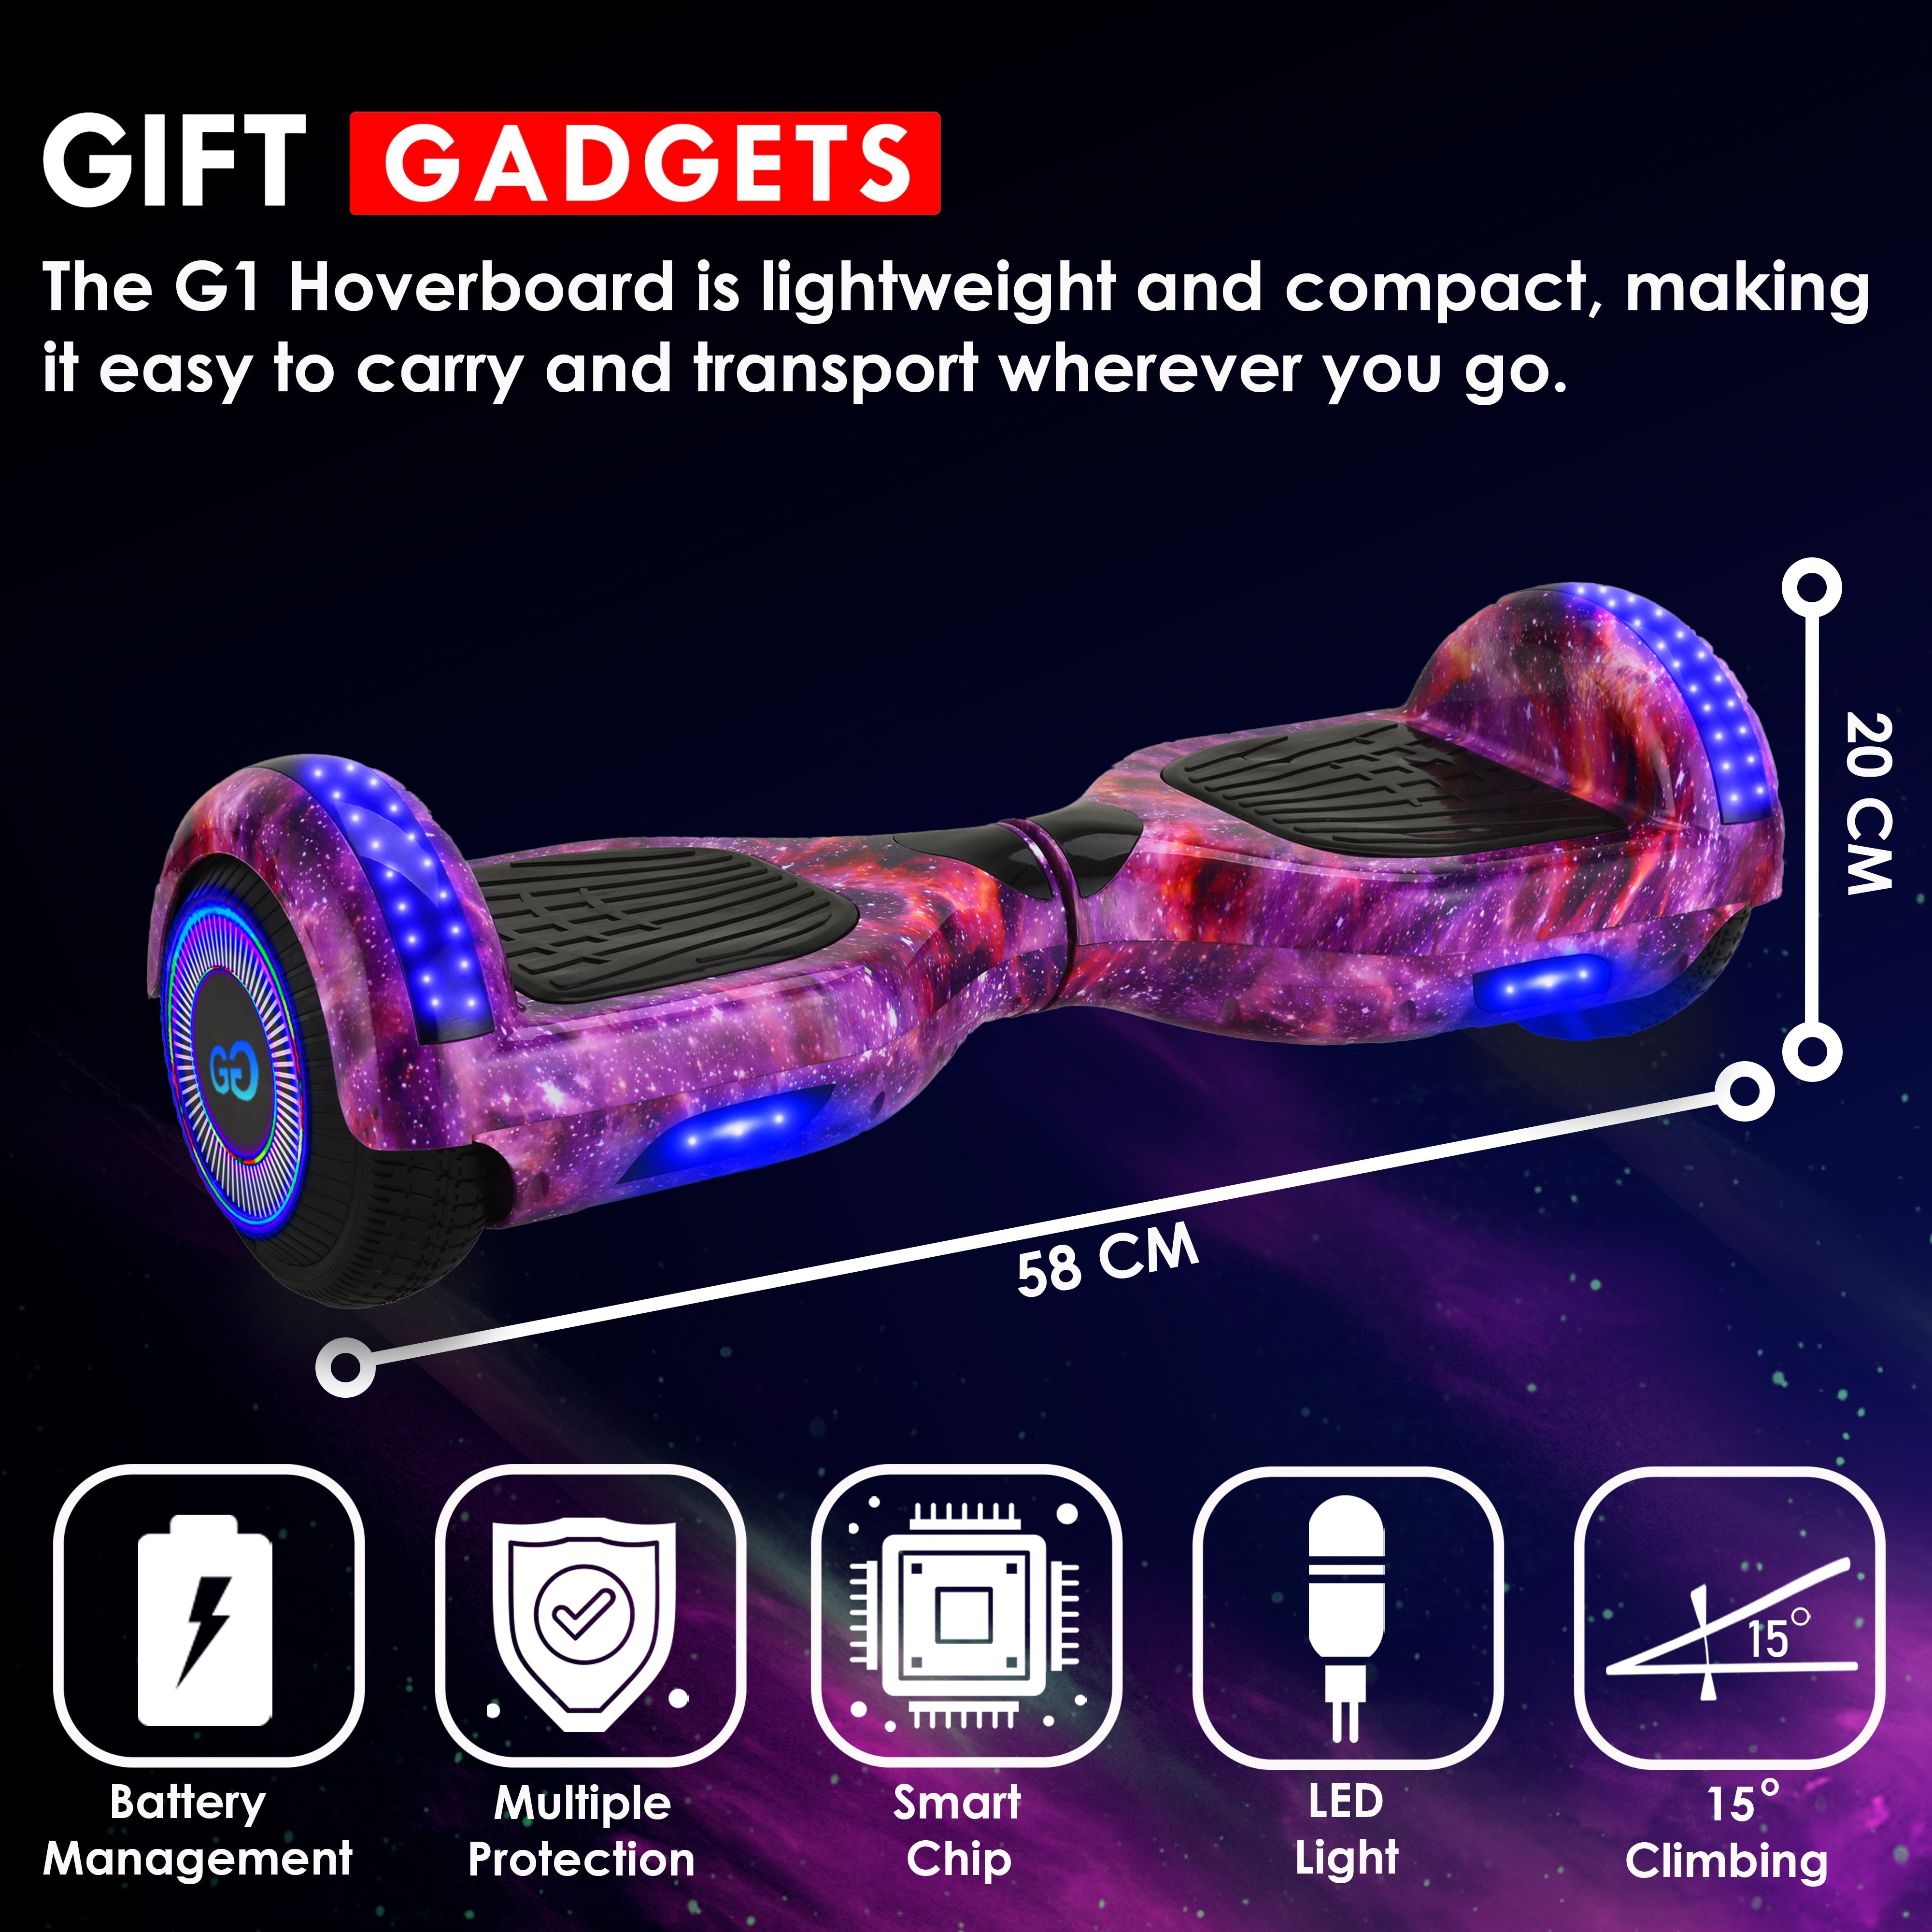 G1 Hoverboard in galaxy pink featuring LED lights, detailed with smart tech specifications like battery management and a 15-degree climbing capacity.